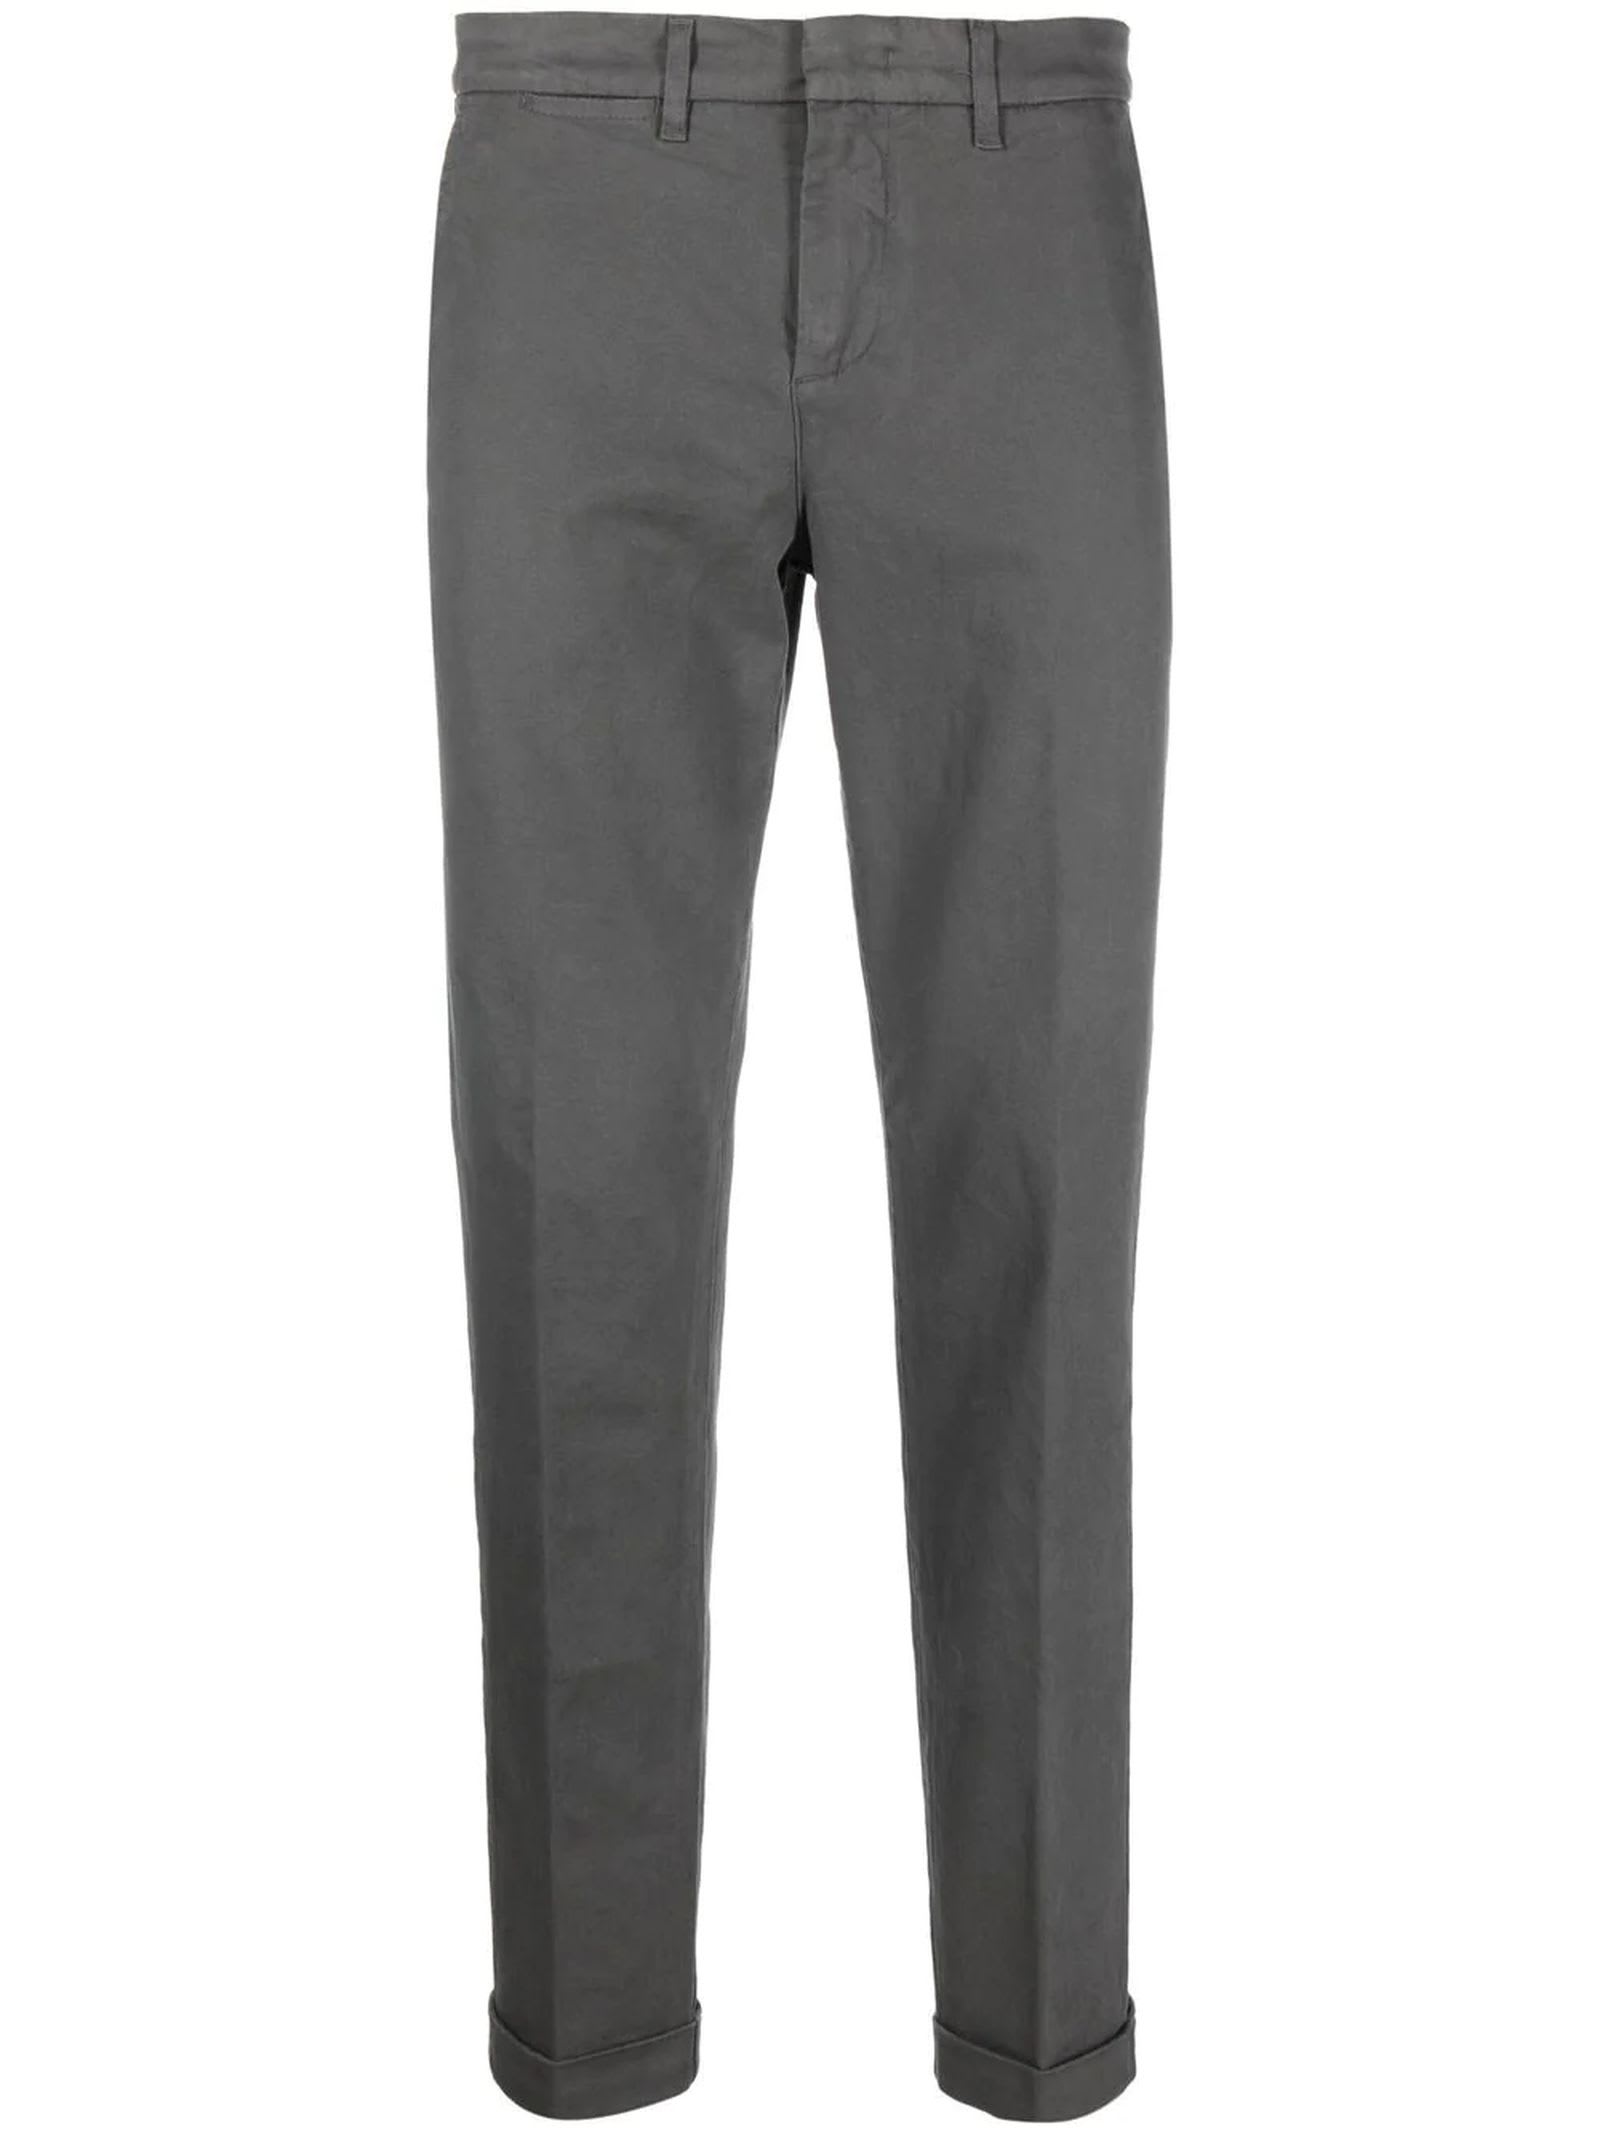 Fay Charcoal Grey Cotton Blend Trousers